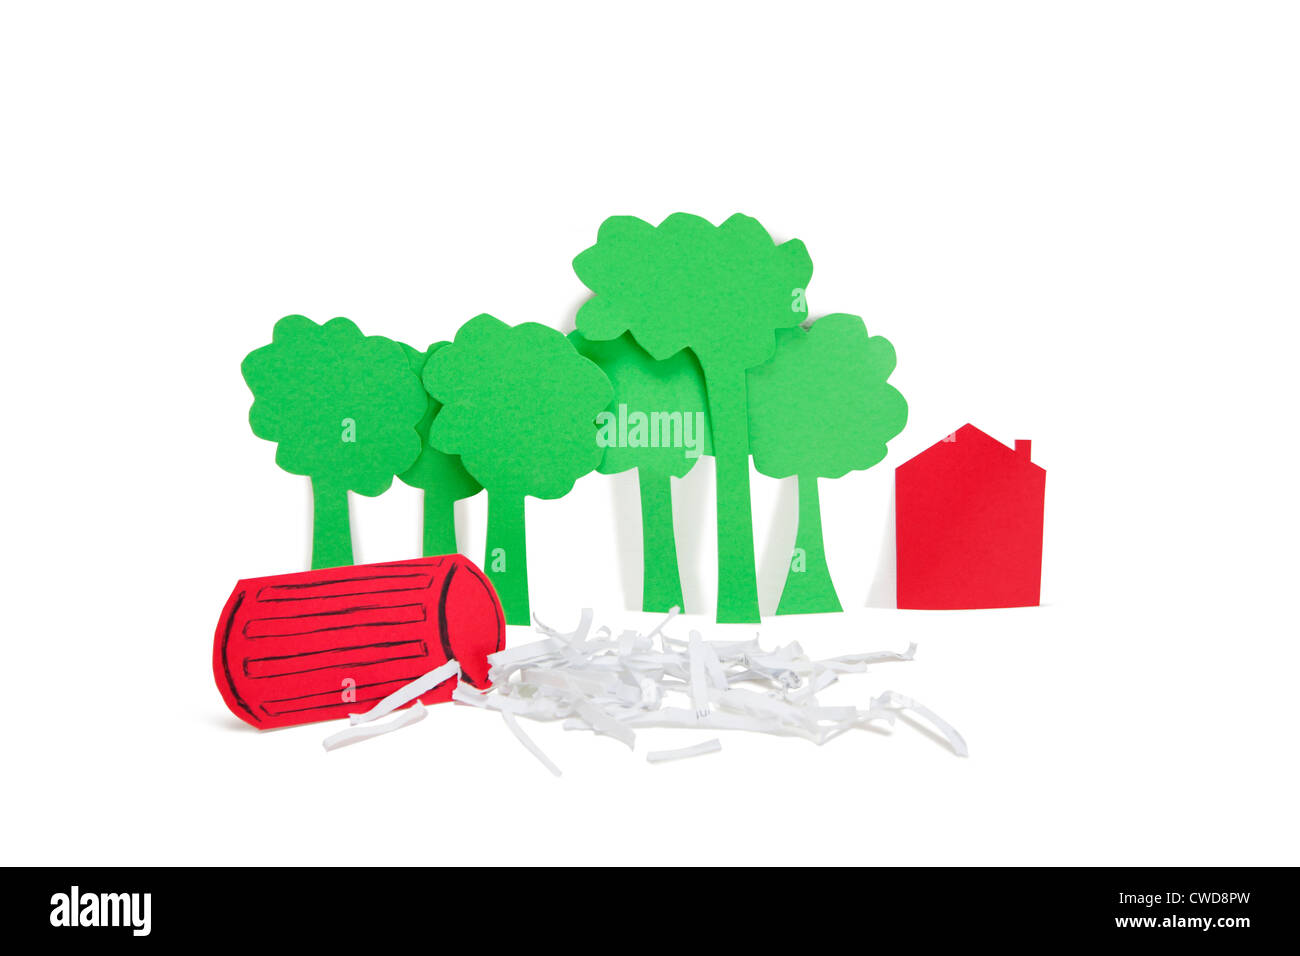 Paper cut outs representing concept of environmental damage over white background Stock Photo